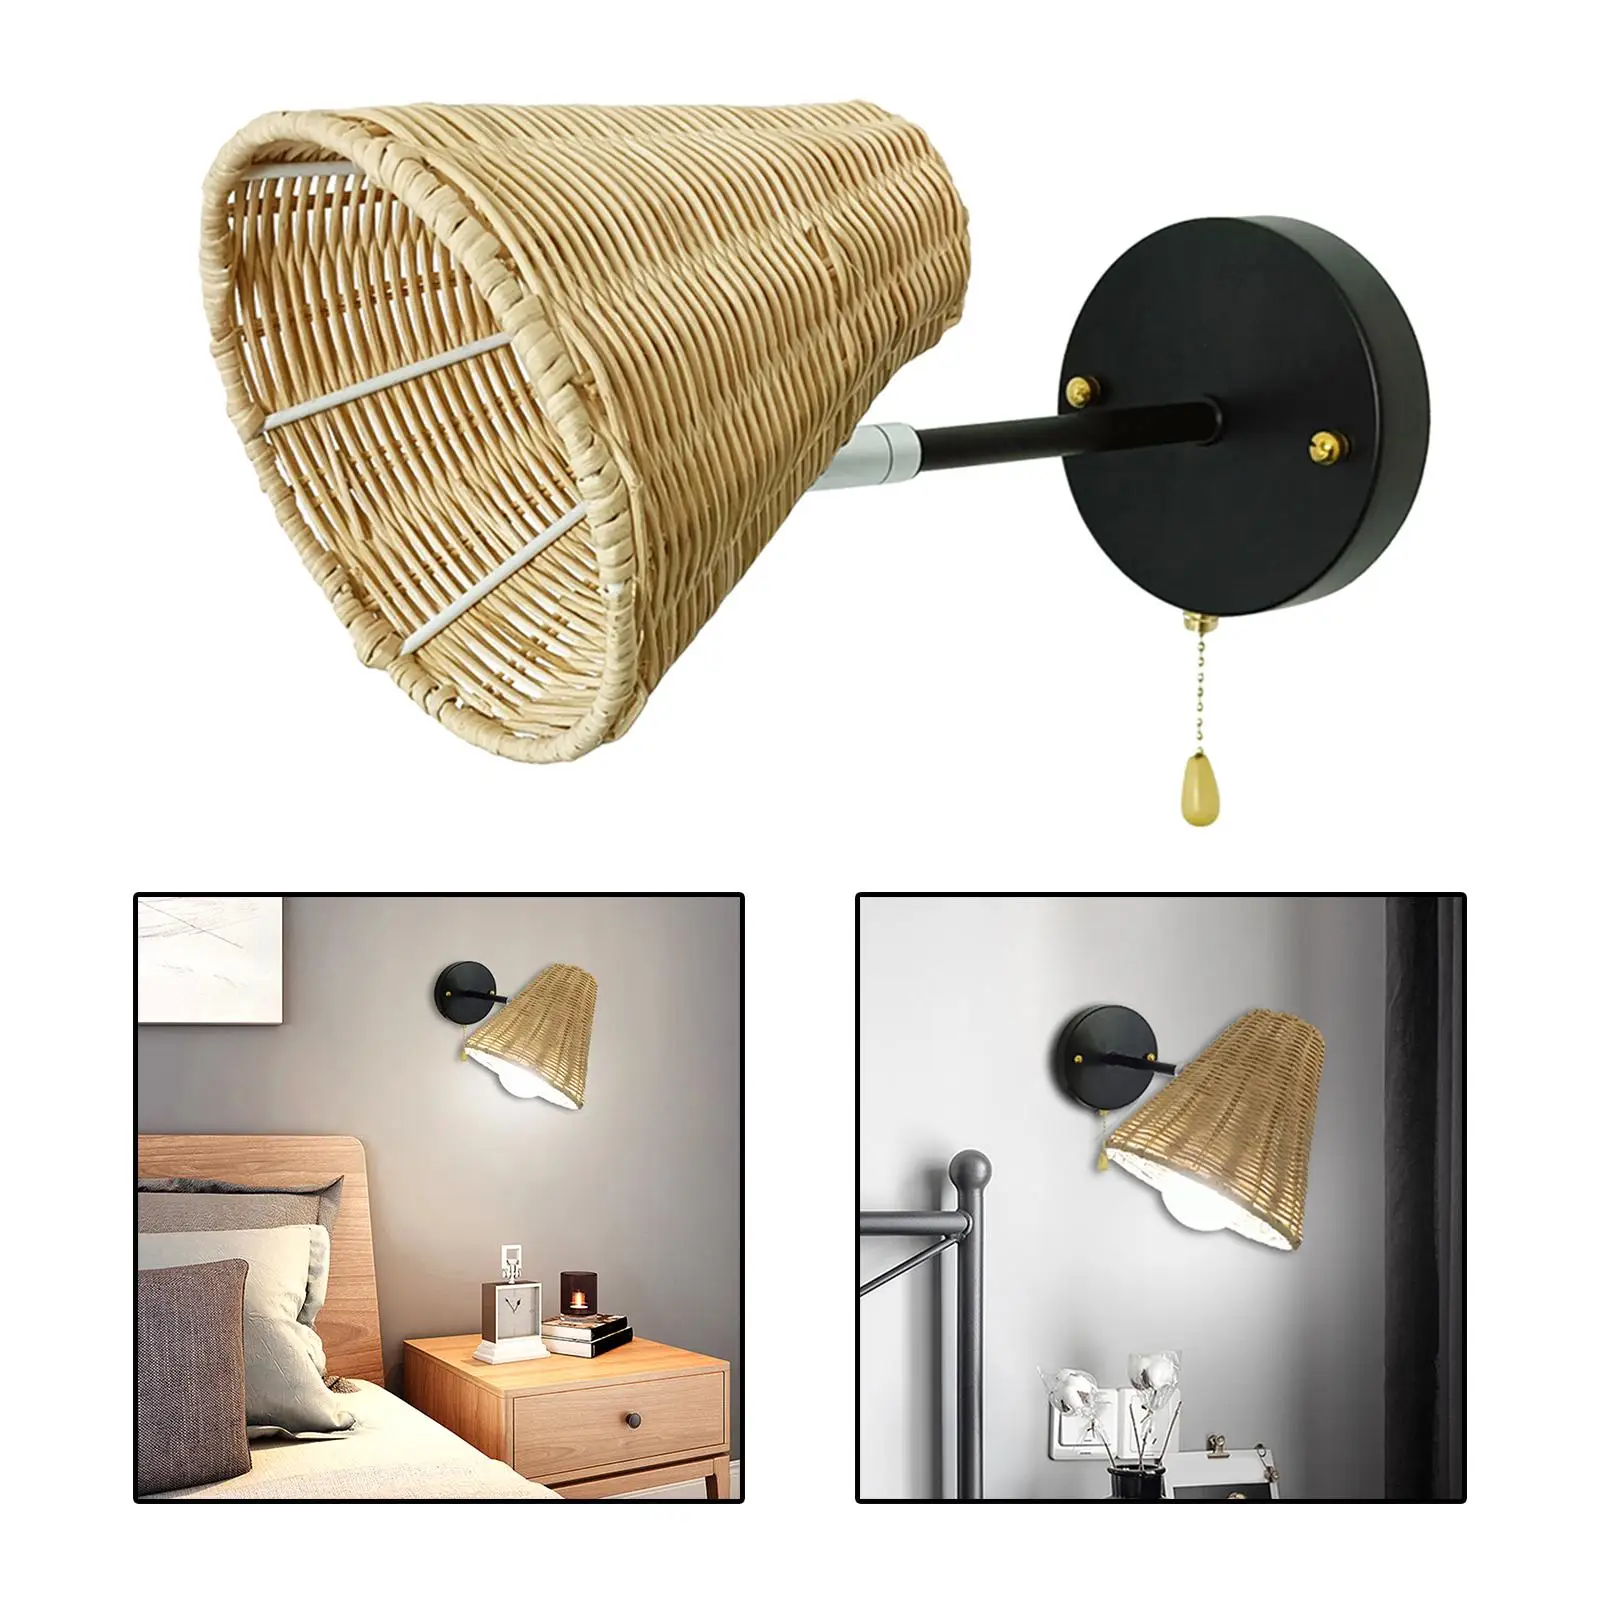 Rattan Wall Lamp Sconce Light W/ Pull Cord Switch Adjustable Home Bedroom